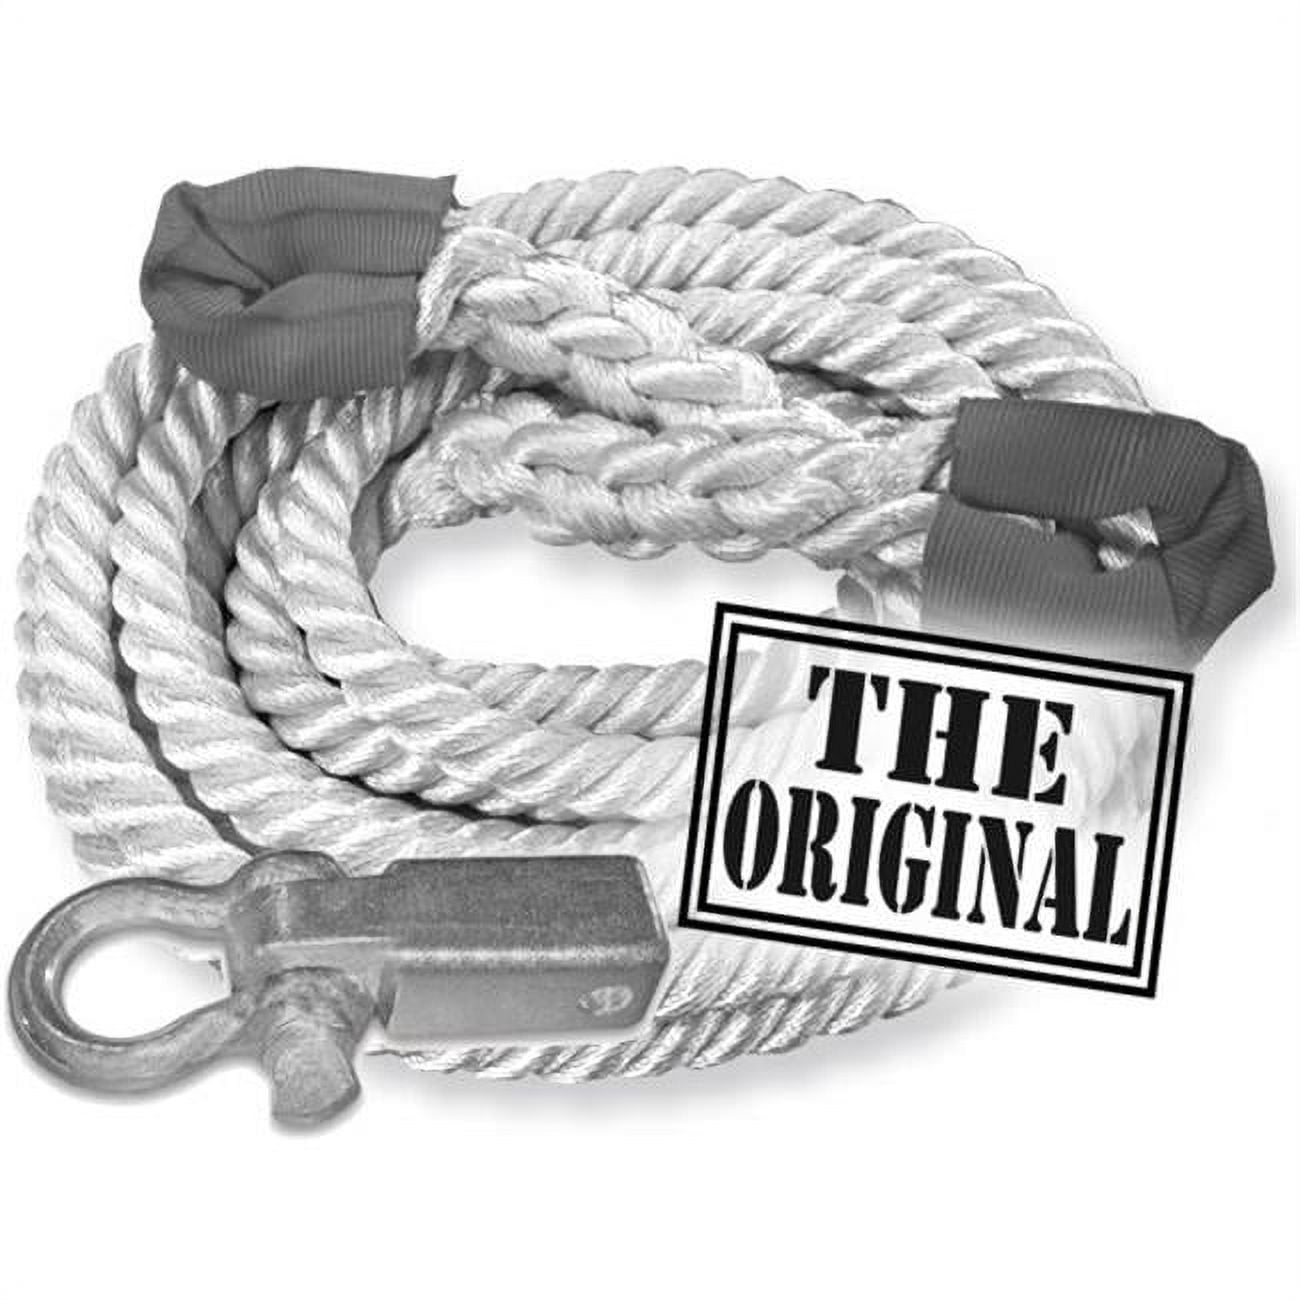 Picture of The &quot;Original Aussie&quot; SNATCH ROPE - 1 inch X 30 ft with Receiver Shackle Bracket (4X4 VEHICLE RECOVERY)